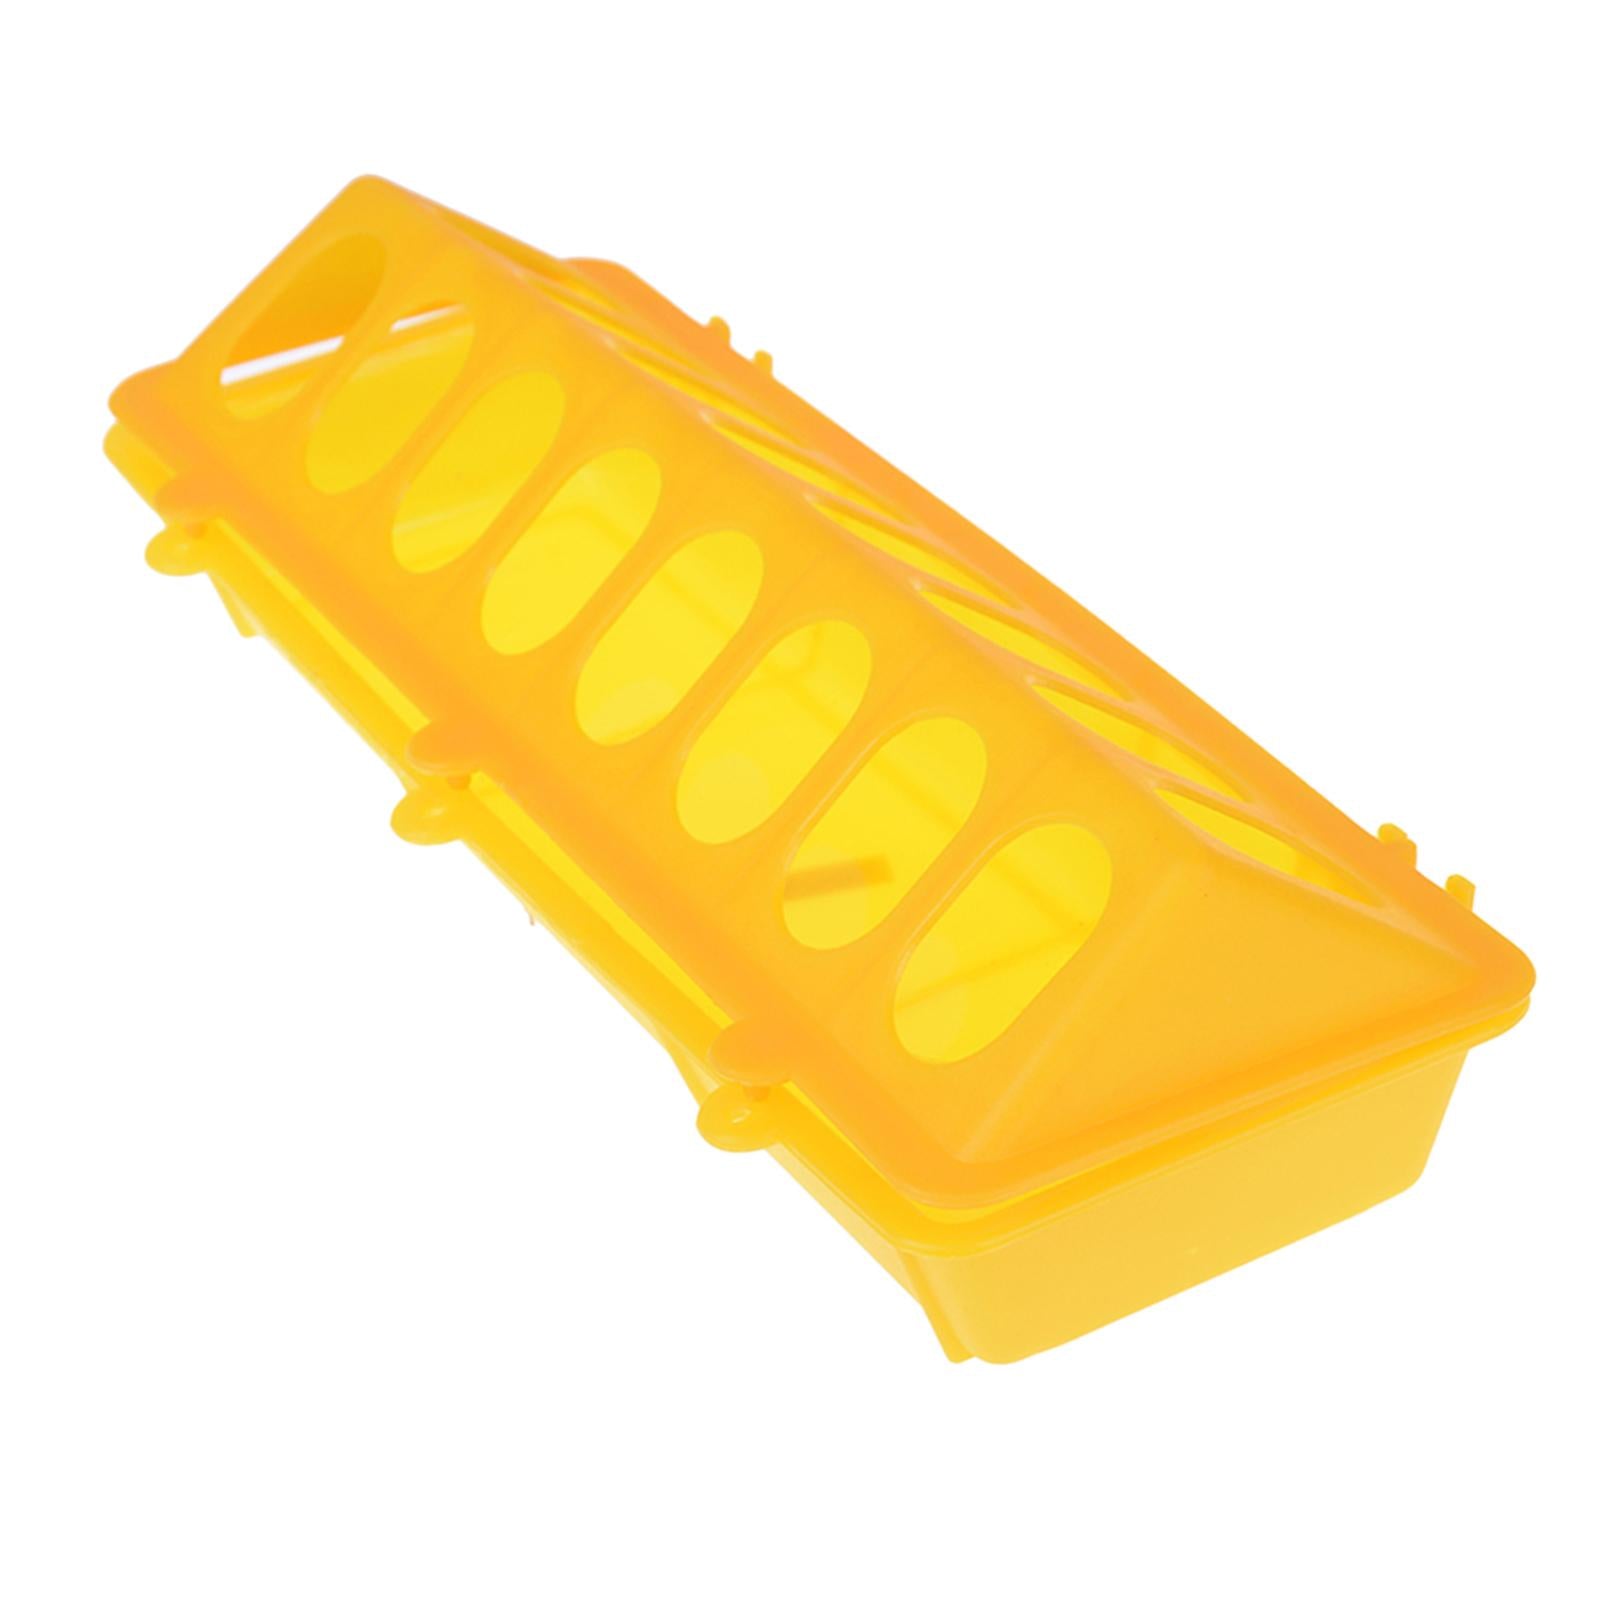 Poultry Feeder Chicken Feeding Trough Plastic Flip Top Container Yellow